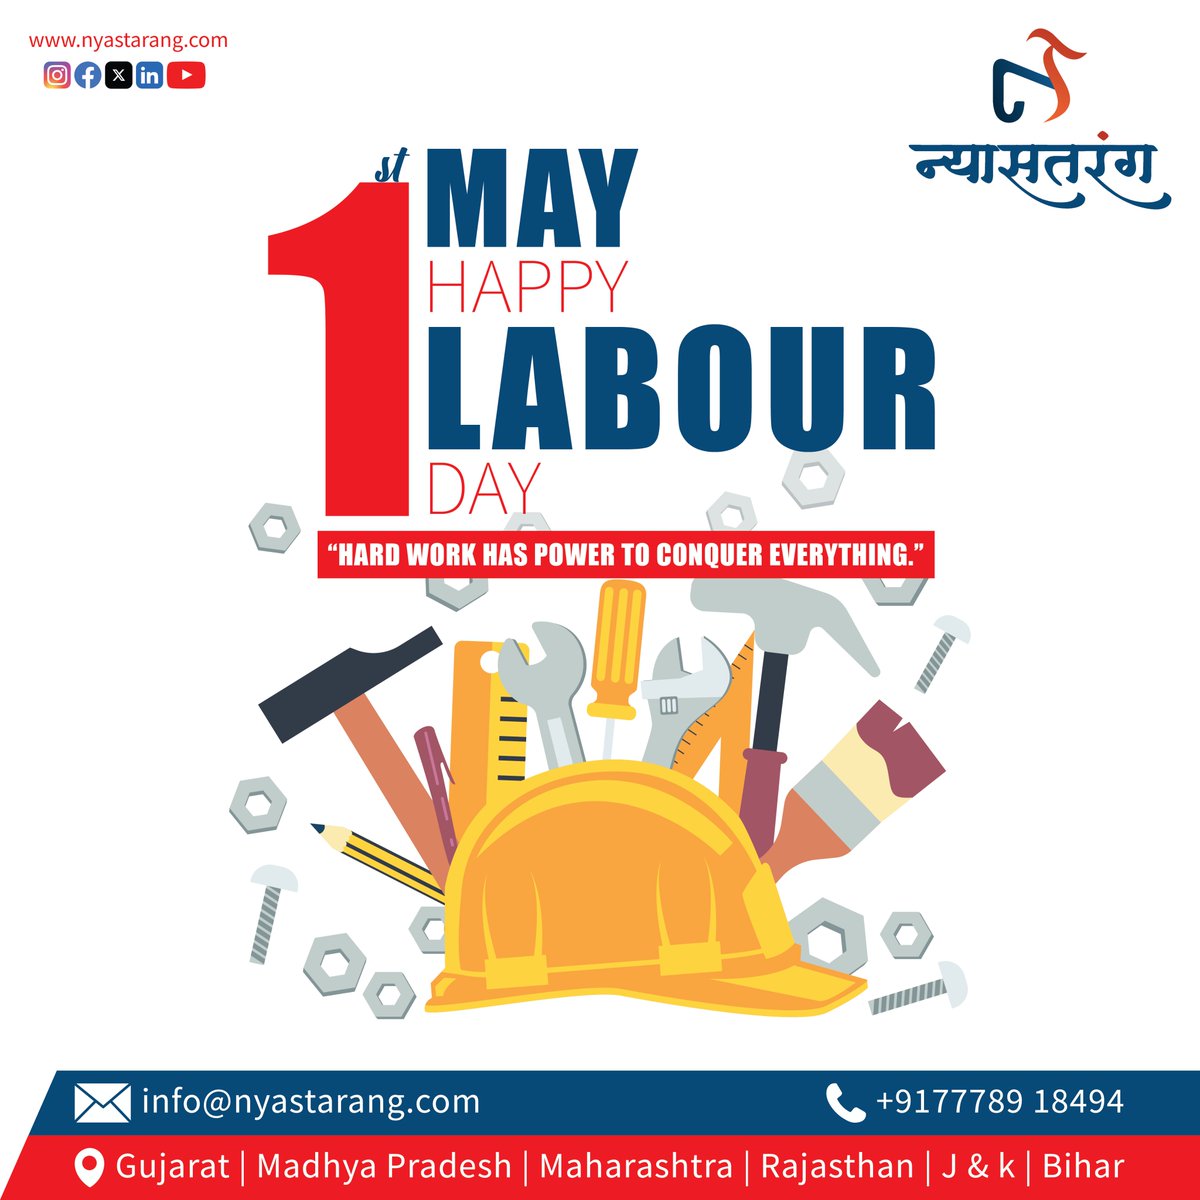 #LabourDay
#MayDay
#WorkersDay
#InternationalWorkersDay
#LaborRights